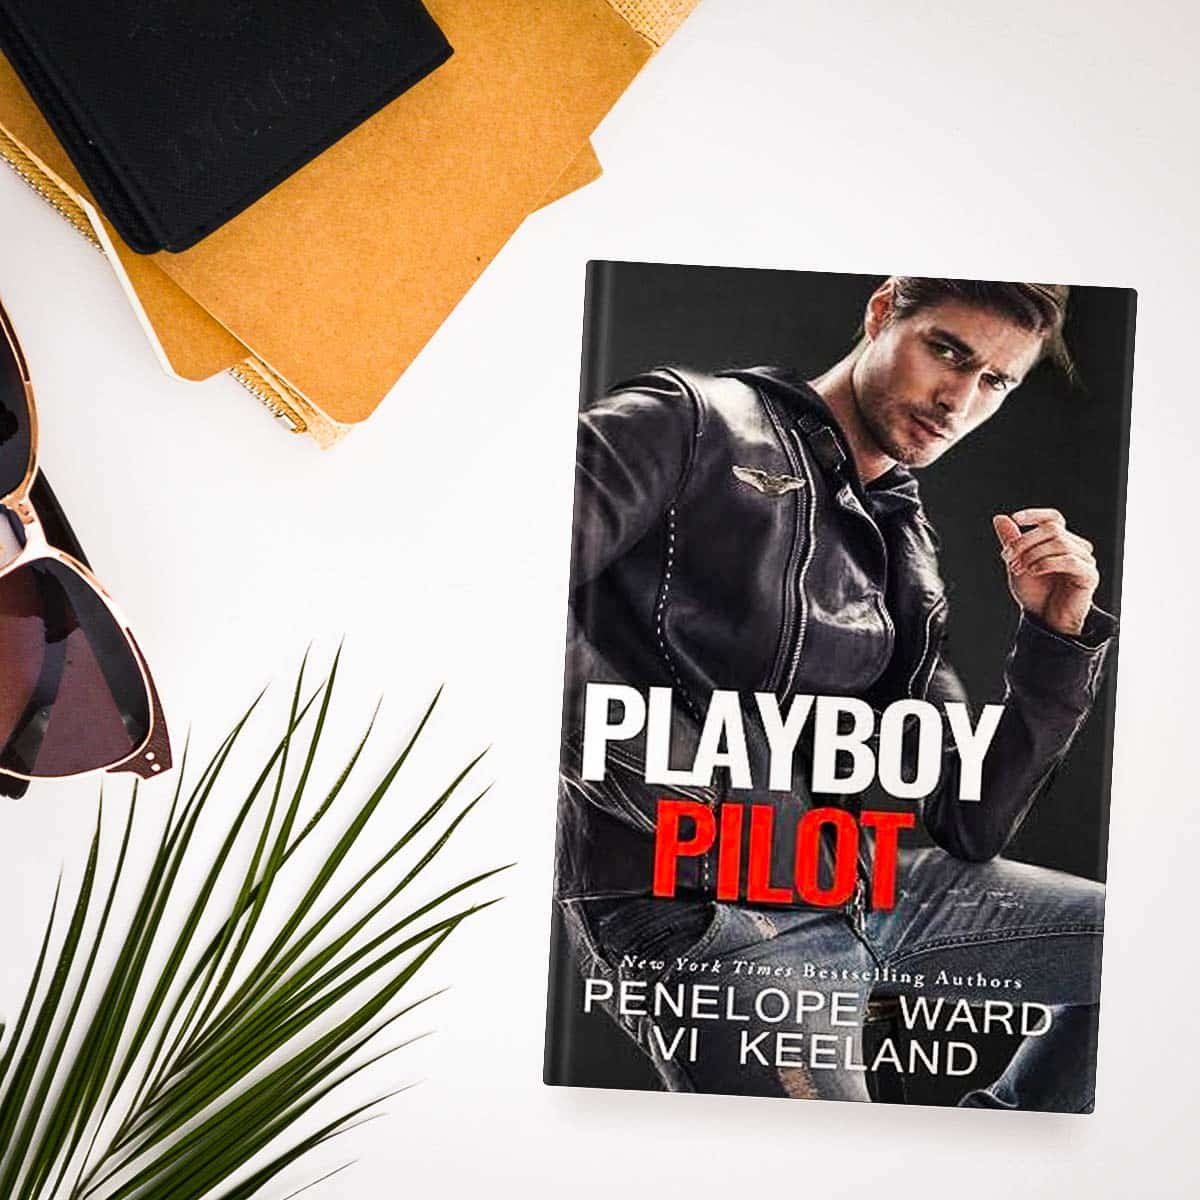 Playboy Pilot by Penelope Ward and Vi Keeland is a vacation romance that's sweet, sexy, humorous, a bit angsty, and of course, has the signature plot twist! Read a review and an excerpt!